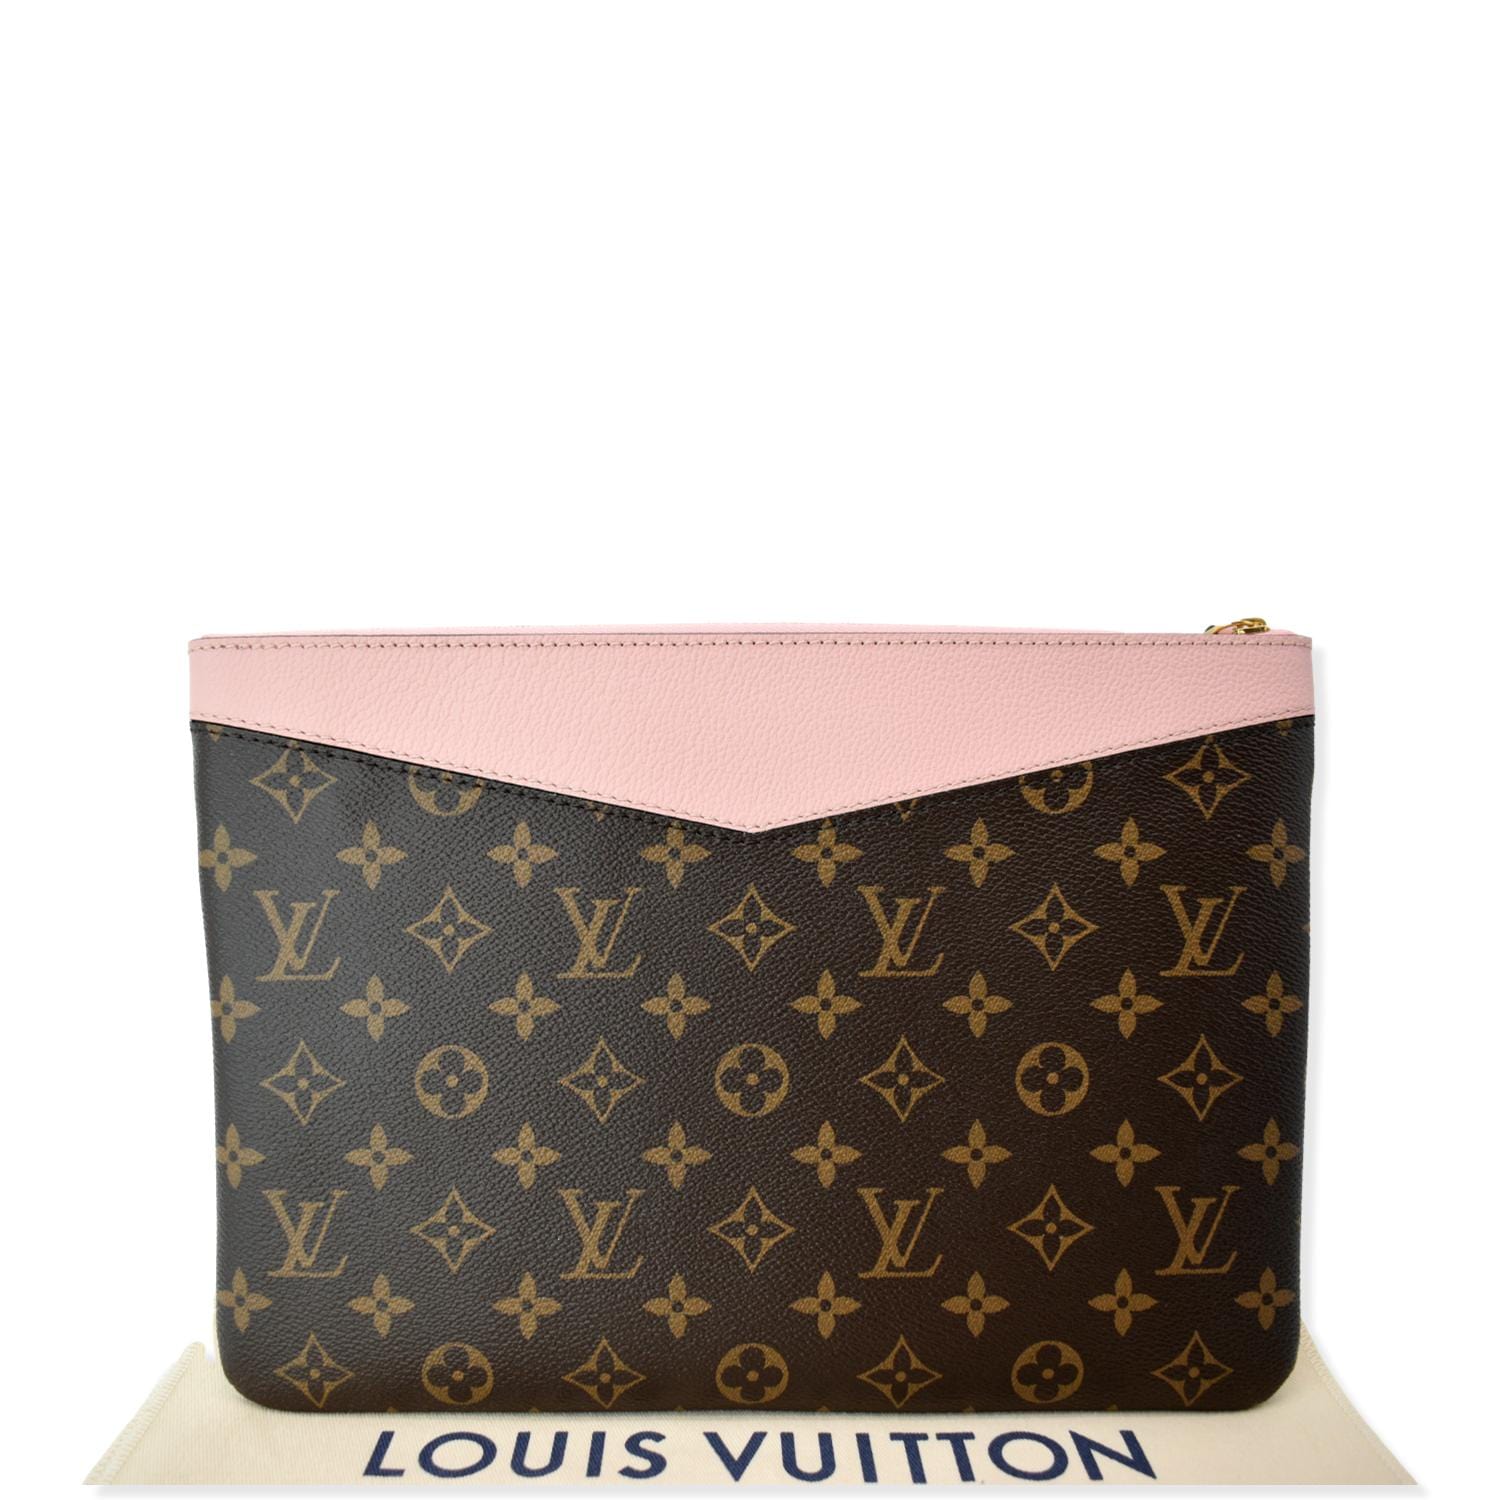 🔥NEW LOUIS VUITTON Monogram Cosmetic Pouch GM Large Clutch